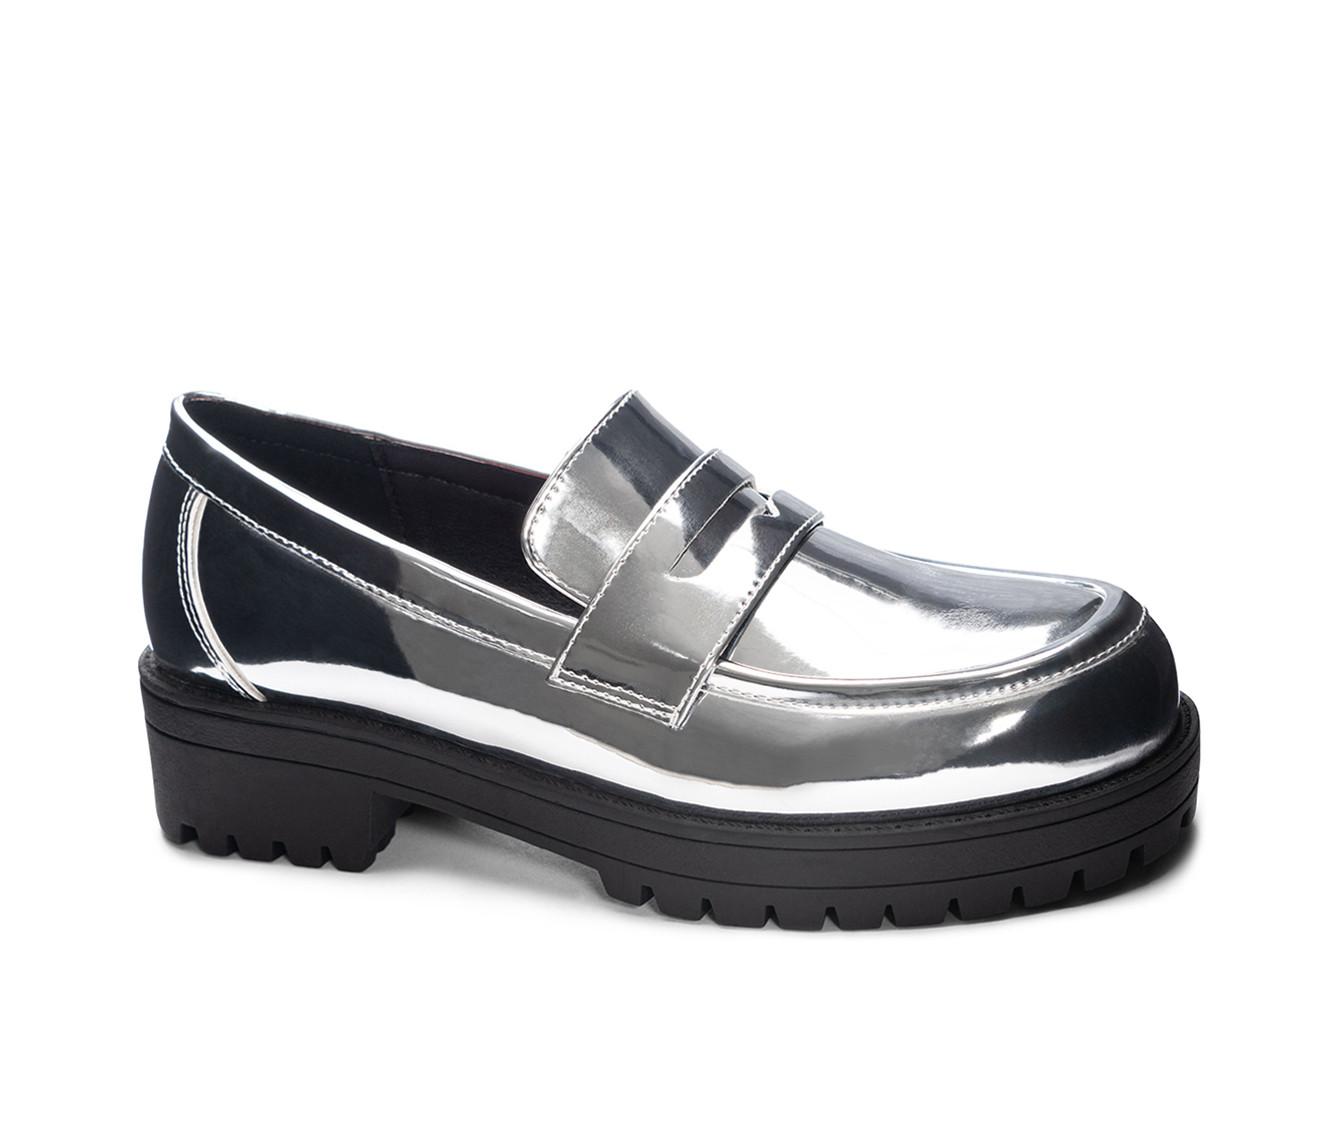 Women's Dirty Laundry Voidz Heeled Loafers